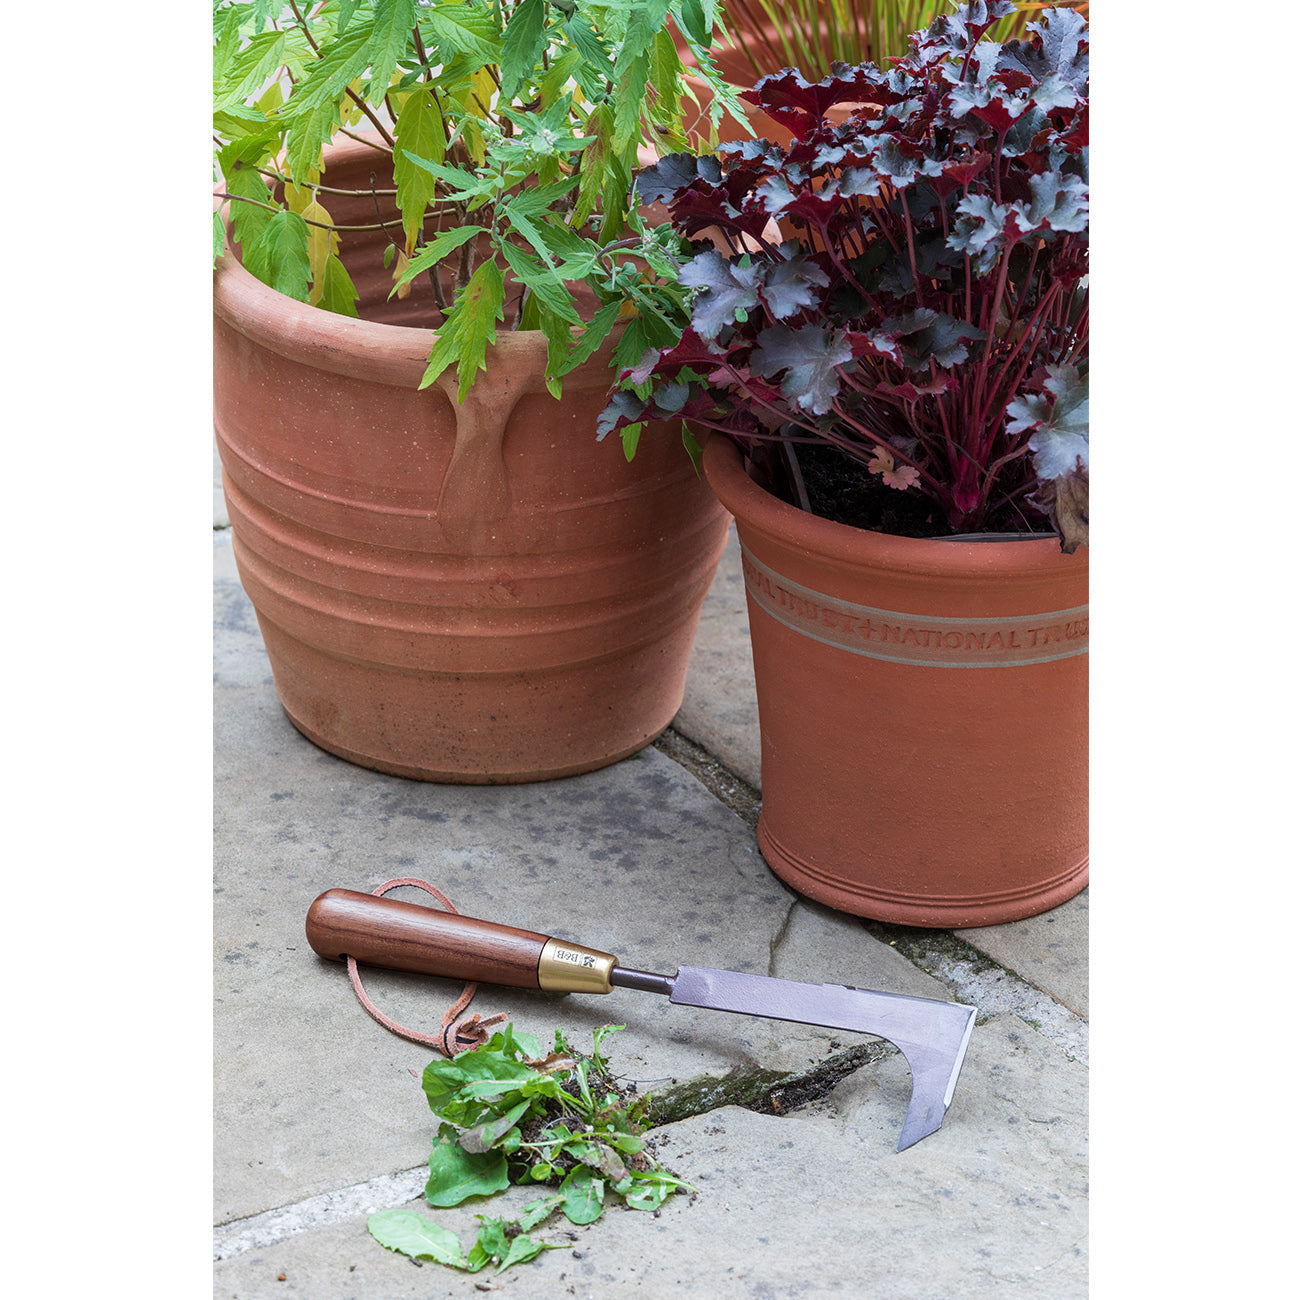 This National Trust patio weeding knife in strong high-carbon steel echoes the style and quality of the garden tools of yesteryear.